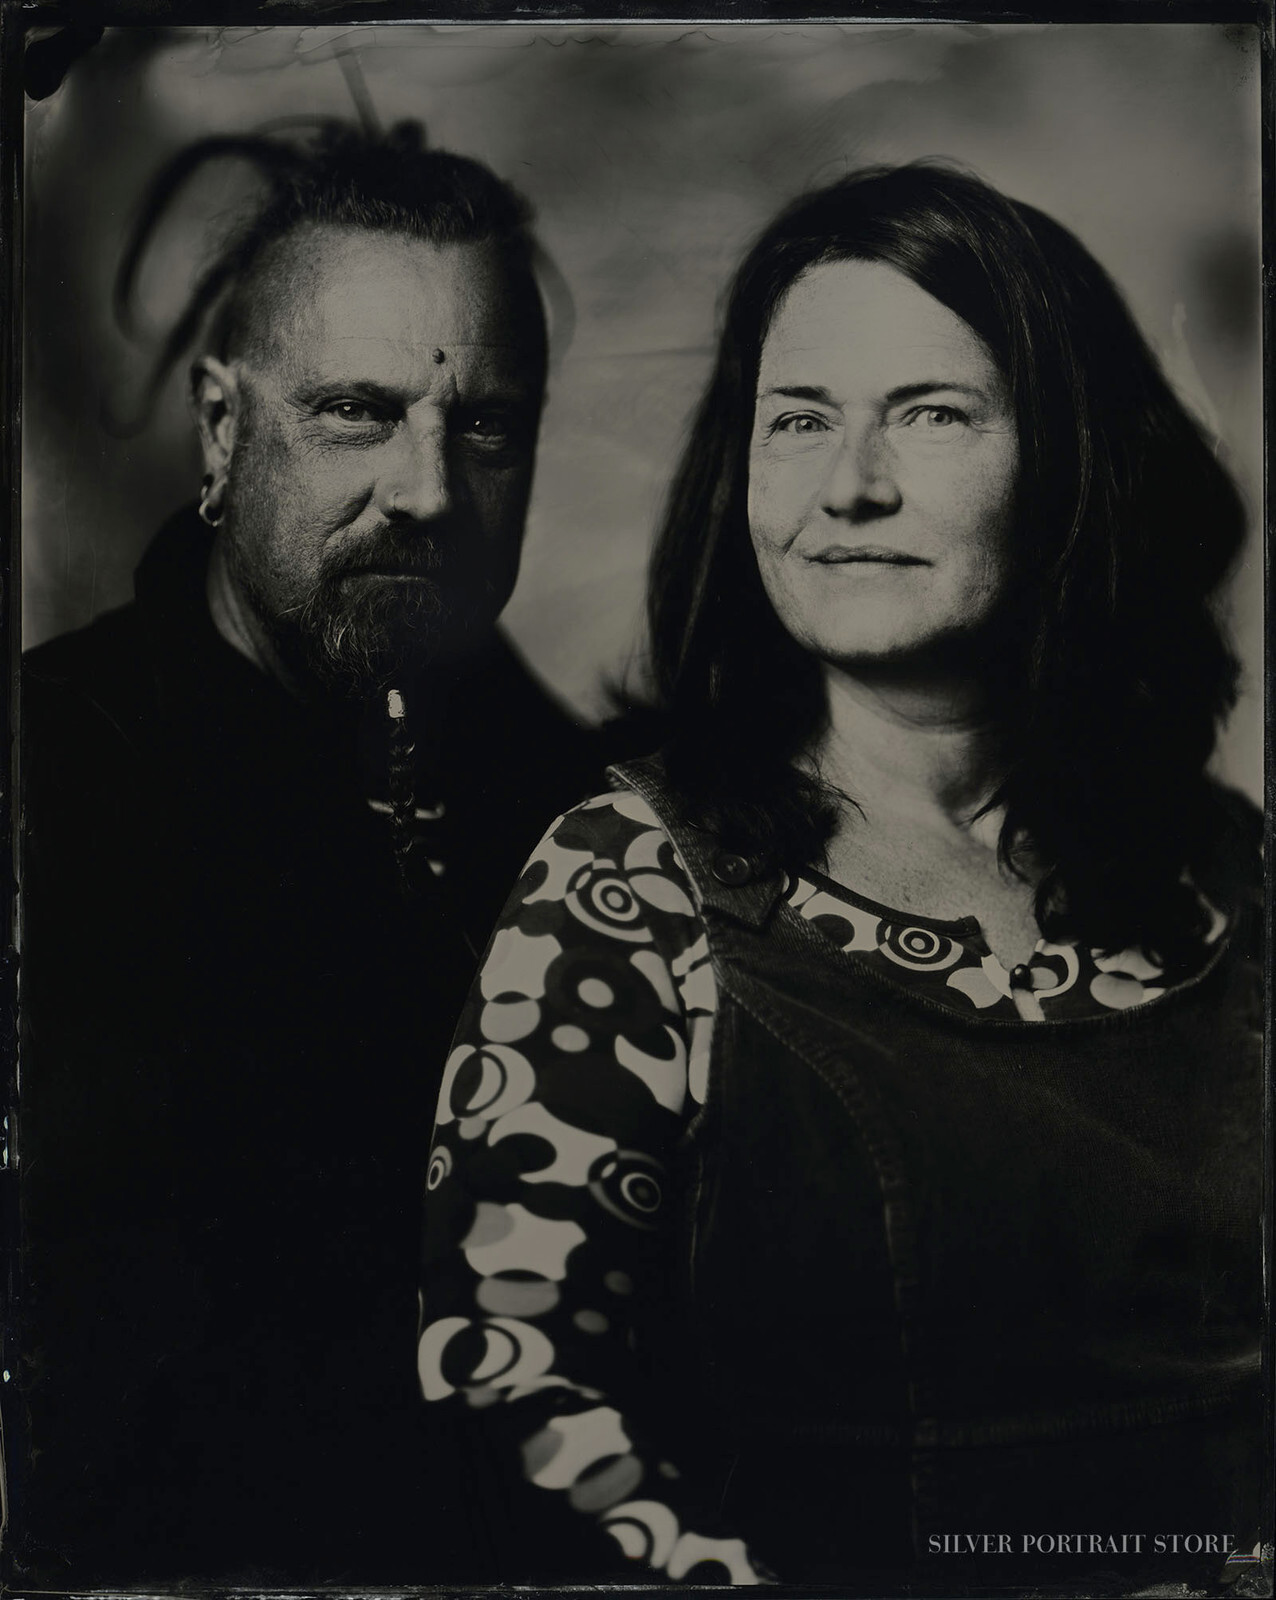 Arne & Pam-Silver Portrait Store-Wet plate collodion-Tintype 20 x 25 cm.